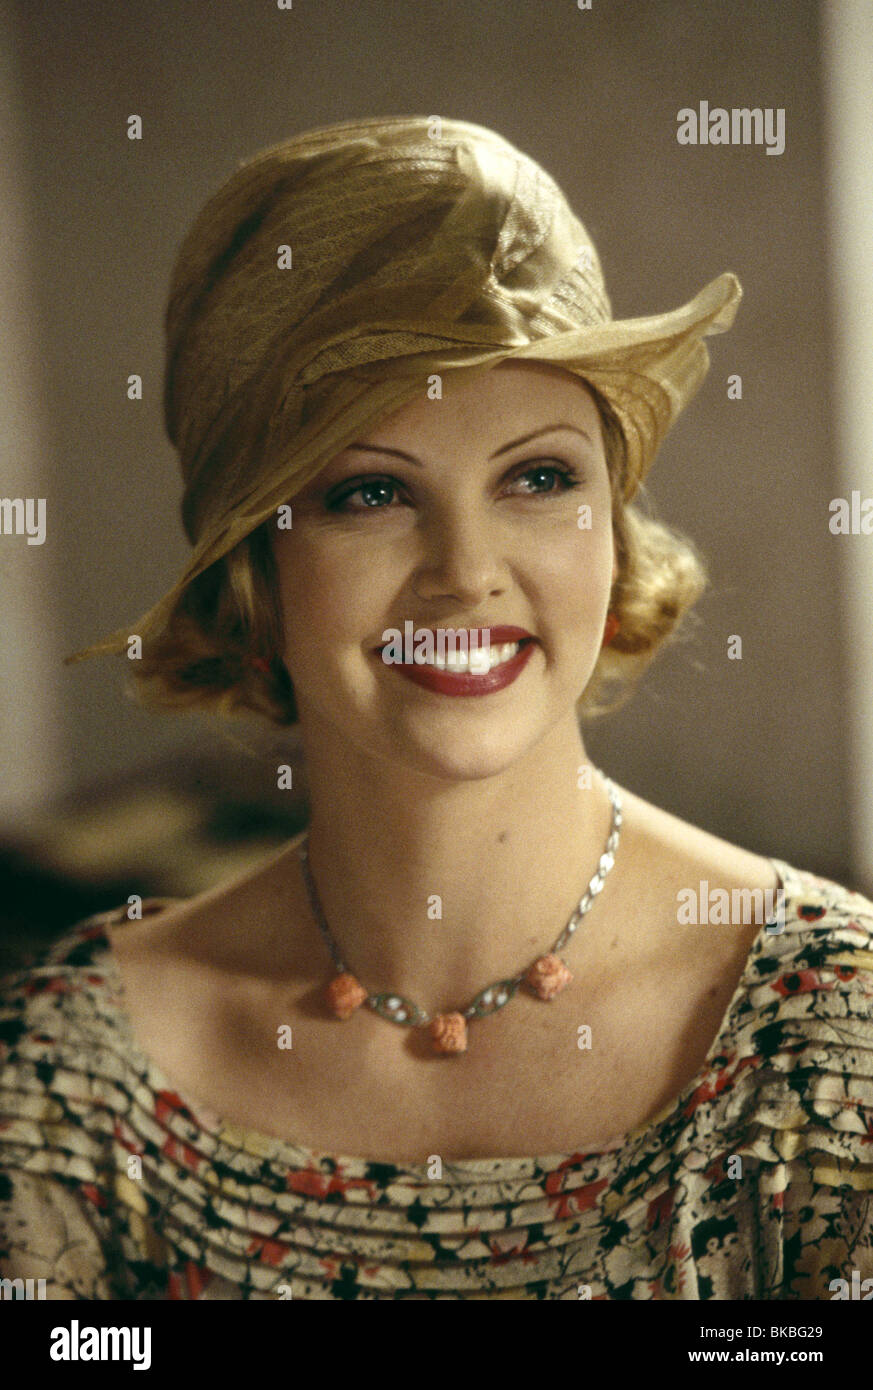 THE LEGEND OF BAGGER VANCE (2000) CHARLIZE THERON BAGG 001 1709 Stock Photo